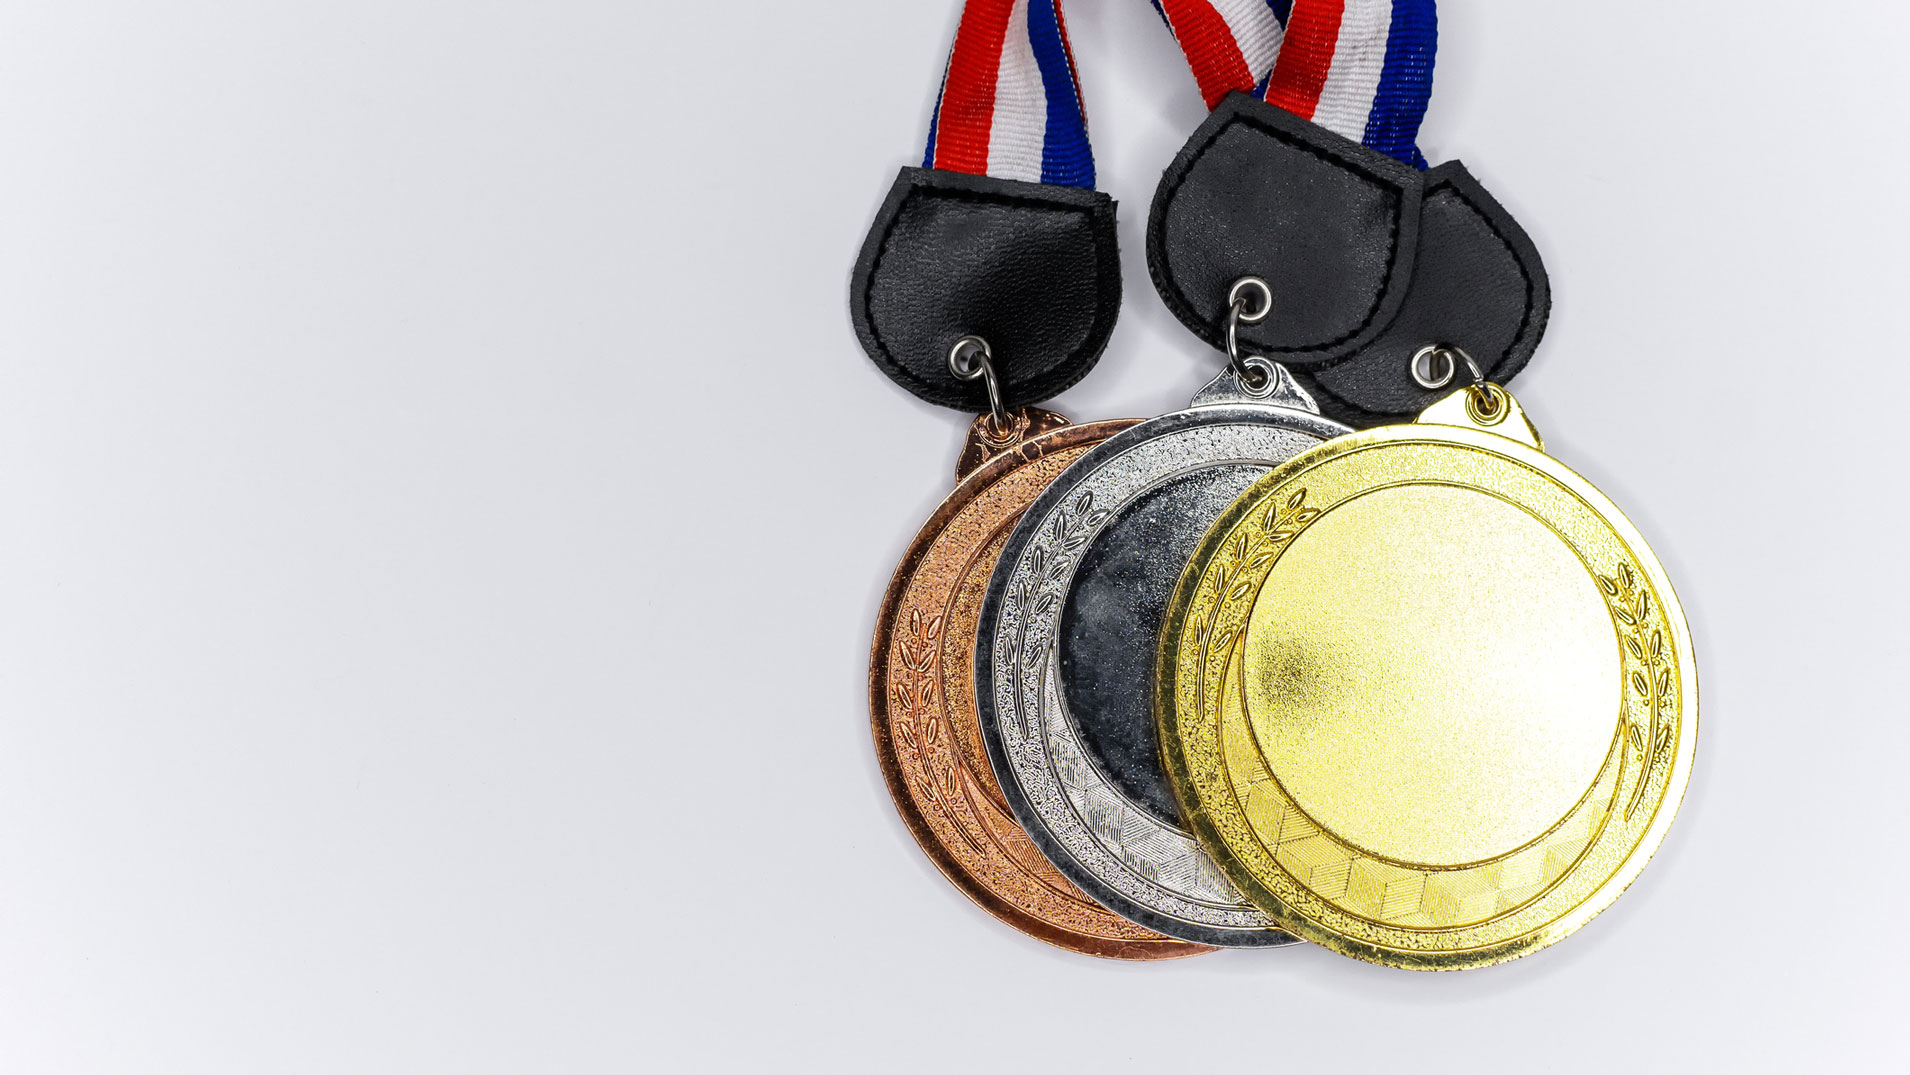 gold, silver, bronze medals